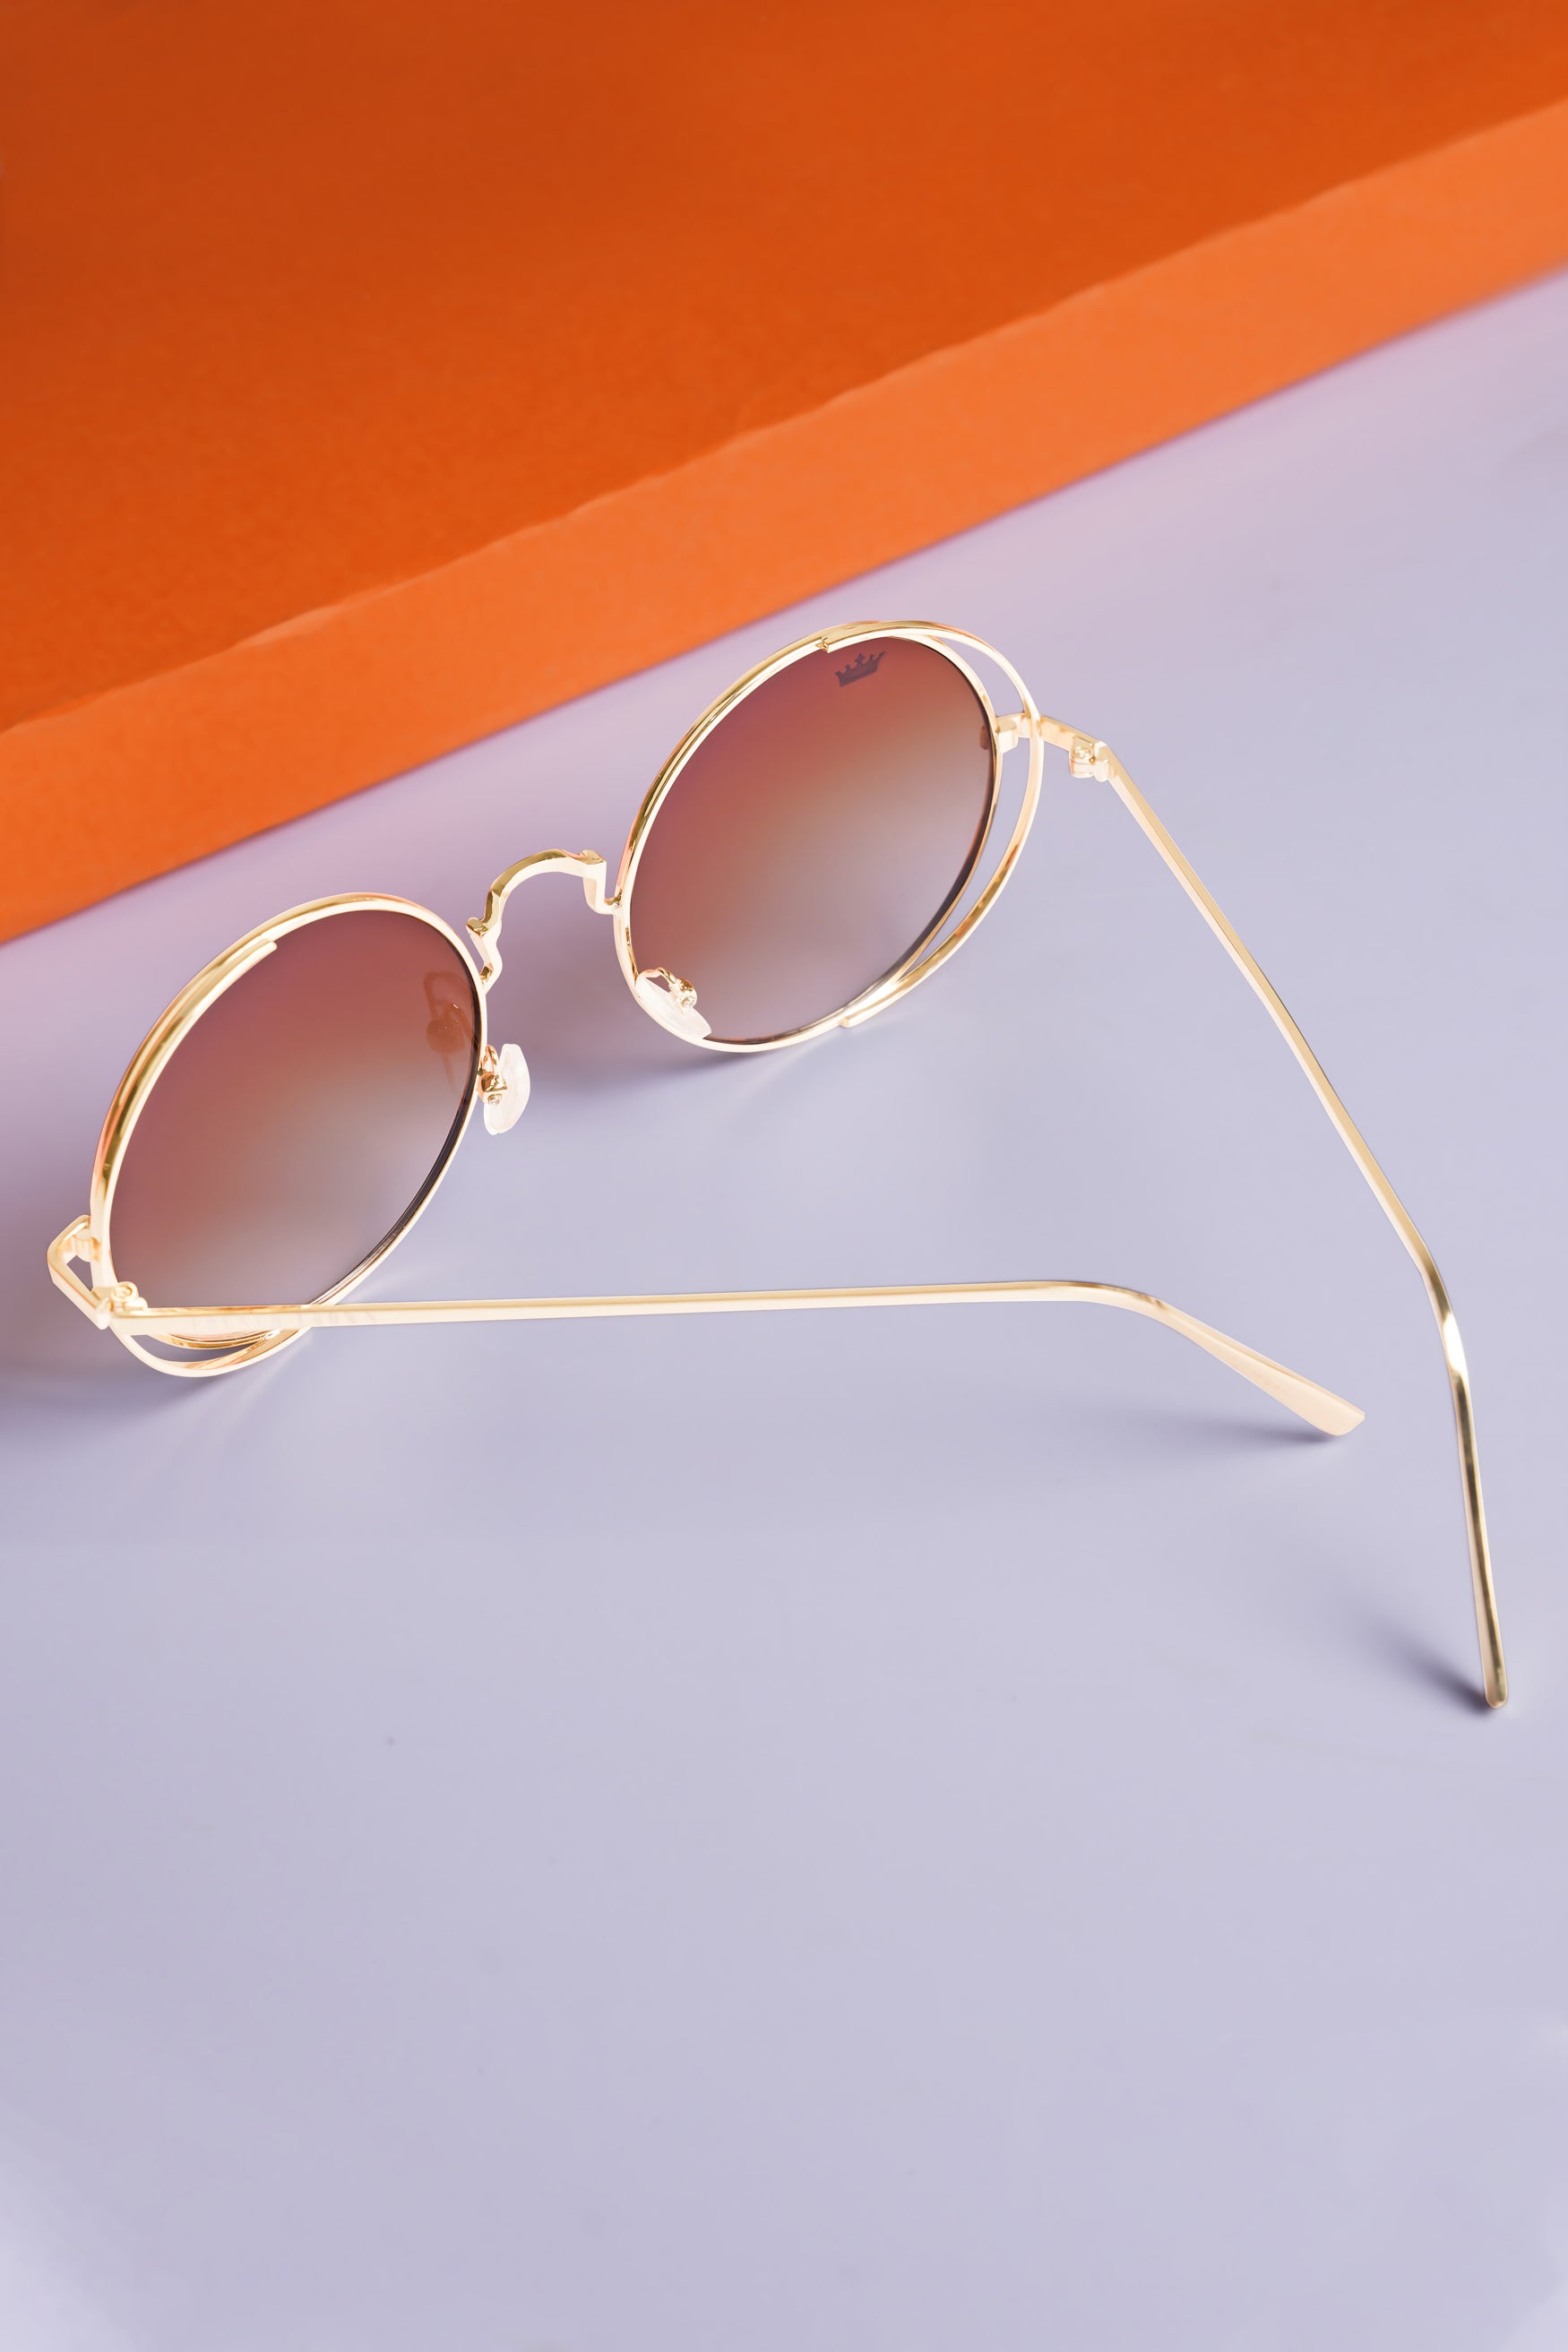 Penny Brown French Crown Round-Shaped Unisex Sunglasses